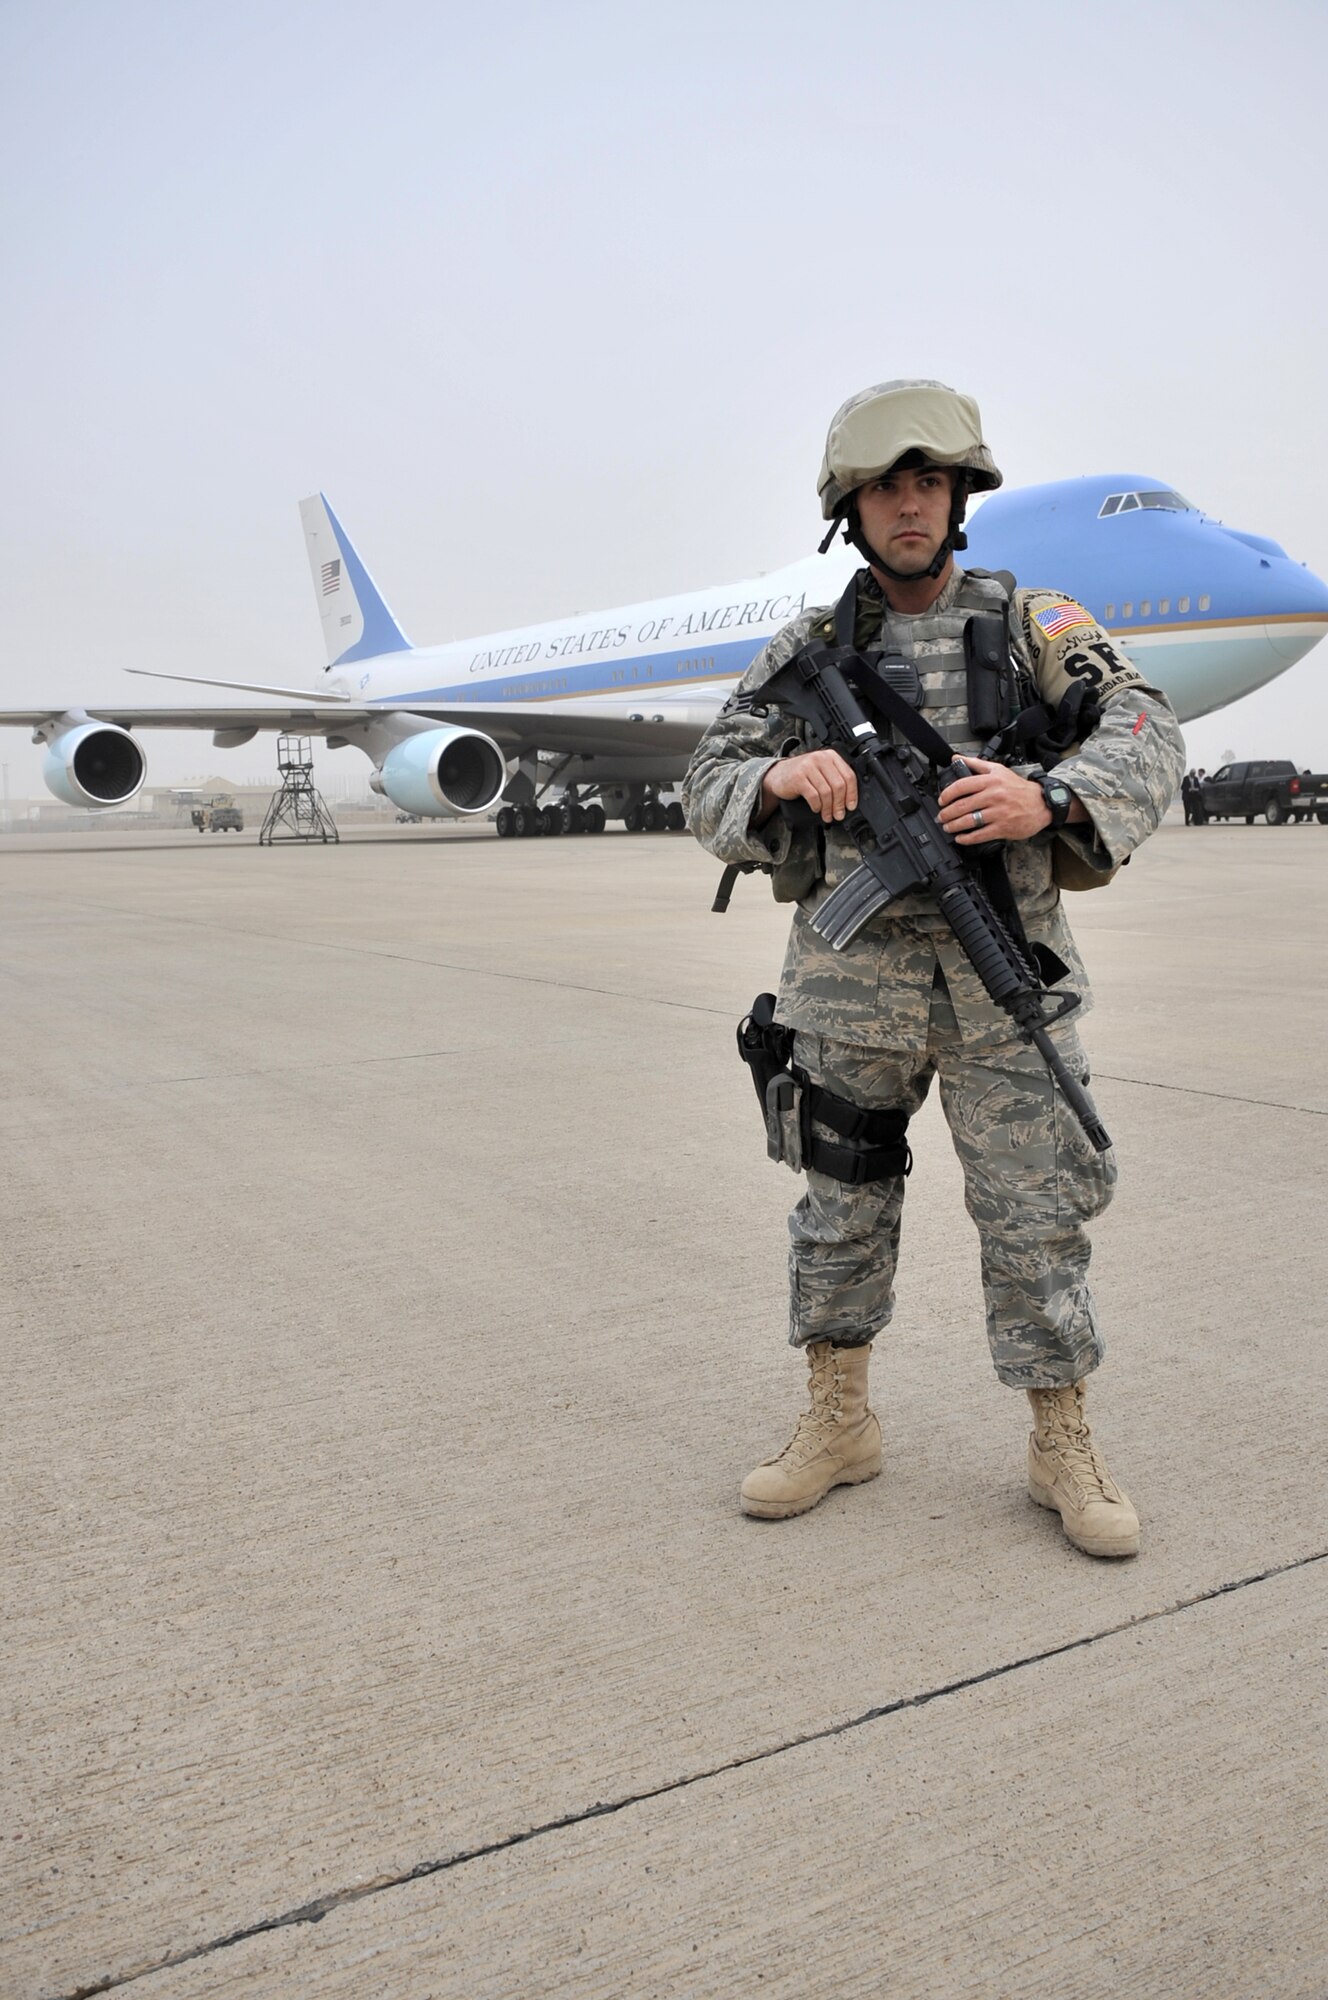 SATHER AIR BASE, Iraq, - Staff Sgt. Matthew Smith, a 447th Expeditionary Security Forces Squadron member, guards Air Force One April 7 on the flightline here. Members of the 447th ESFS protected Air Force One while President Barack Obama spoke to a crowd of nearly 1,500, servicemembers, government civilians and contractors, at Al Faw Palace, Camp Victory, Iraq, during an unannounced visit to Iraq. The visit marked the president’s first trip to Iraq since taking office. (U.S. Air Force Photo by Staff Sgt. Amanda Currier)